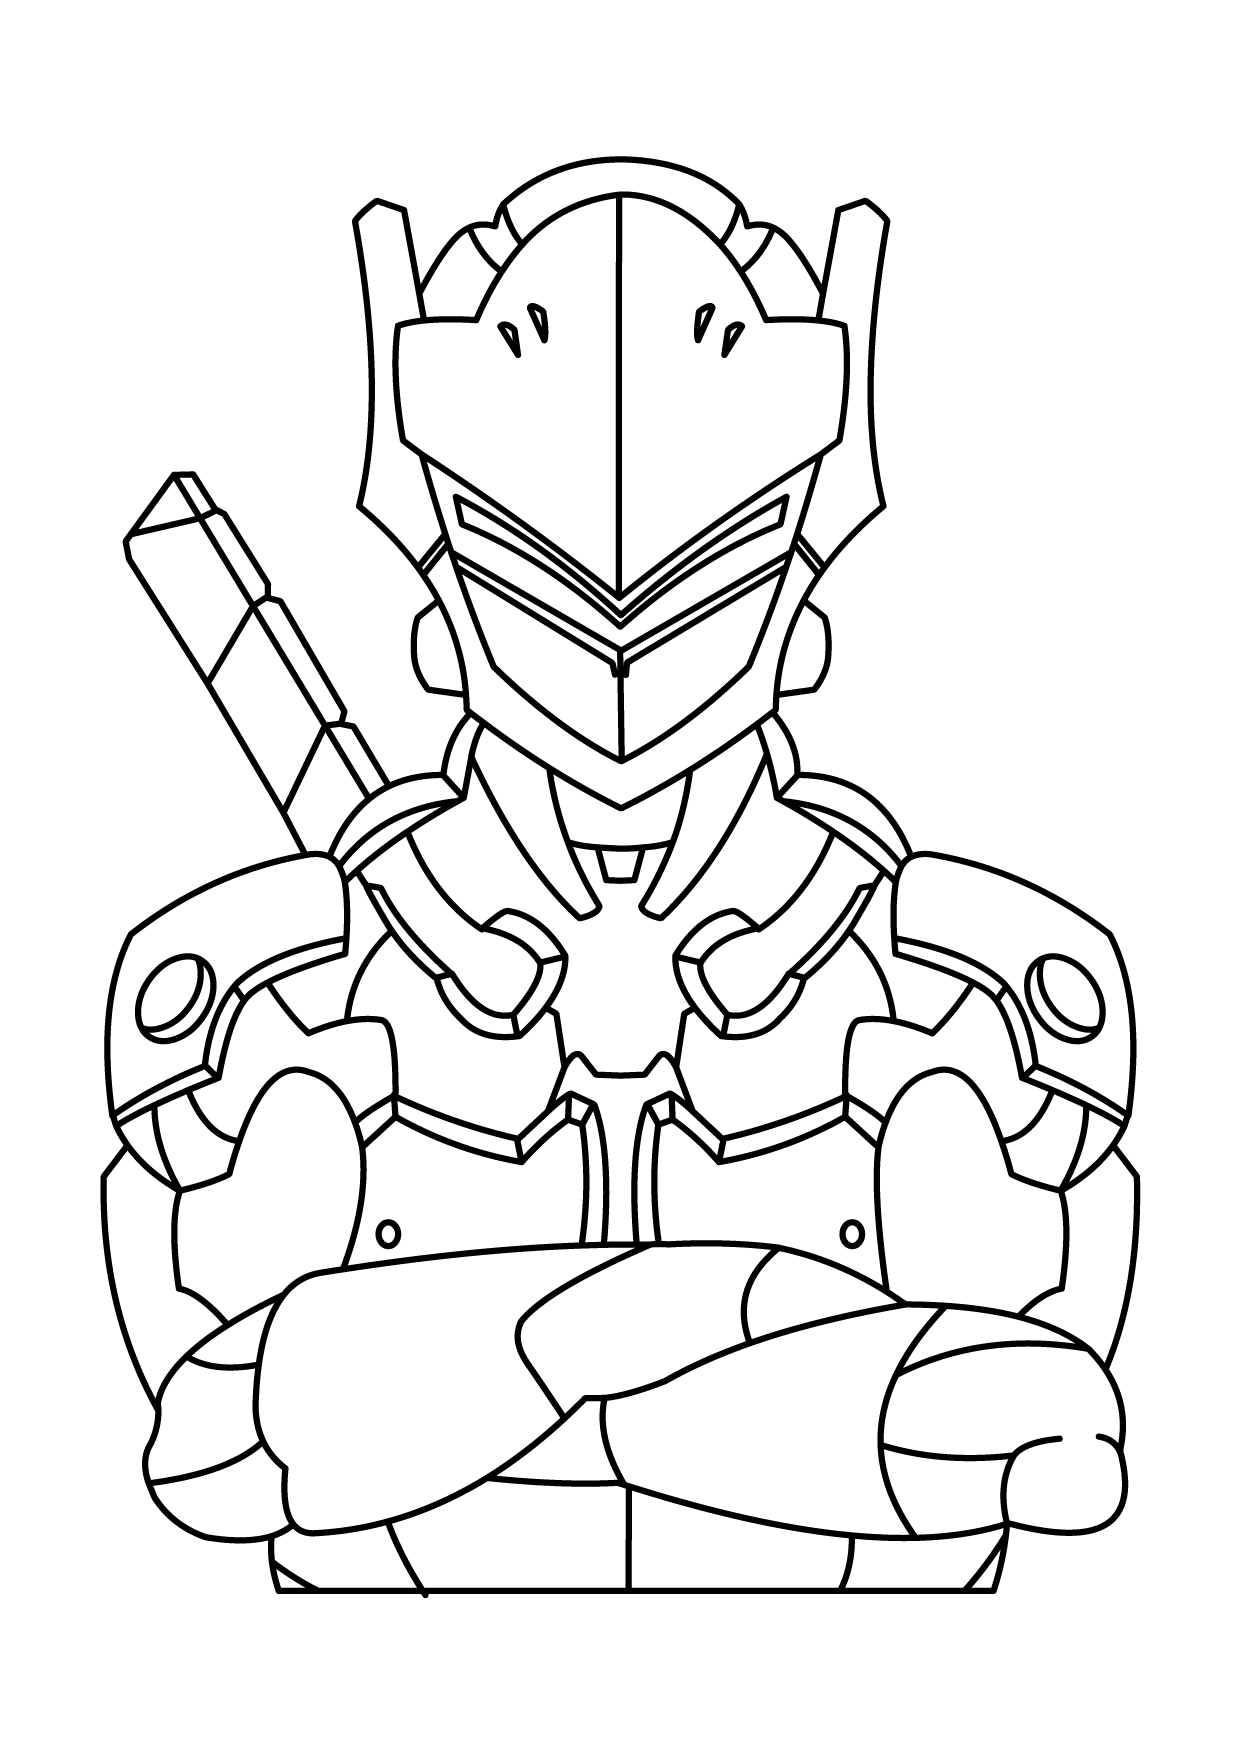 Genji Front Coloring Page - Free Printable Coloring Pages for Kids